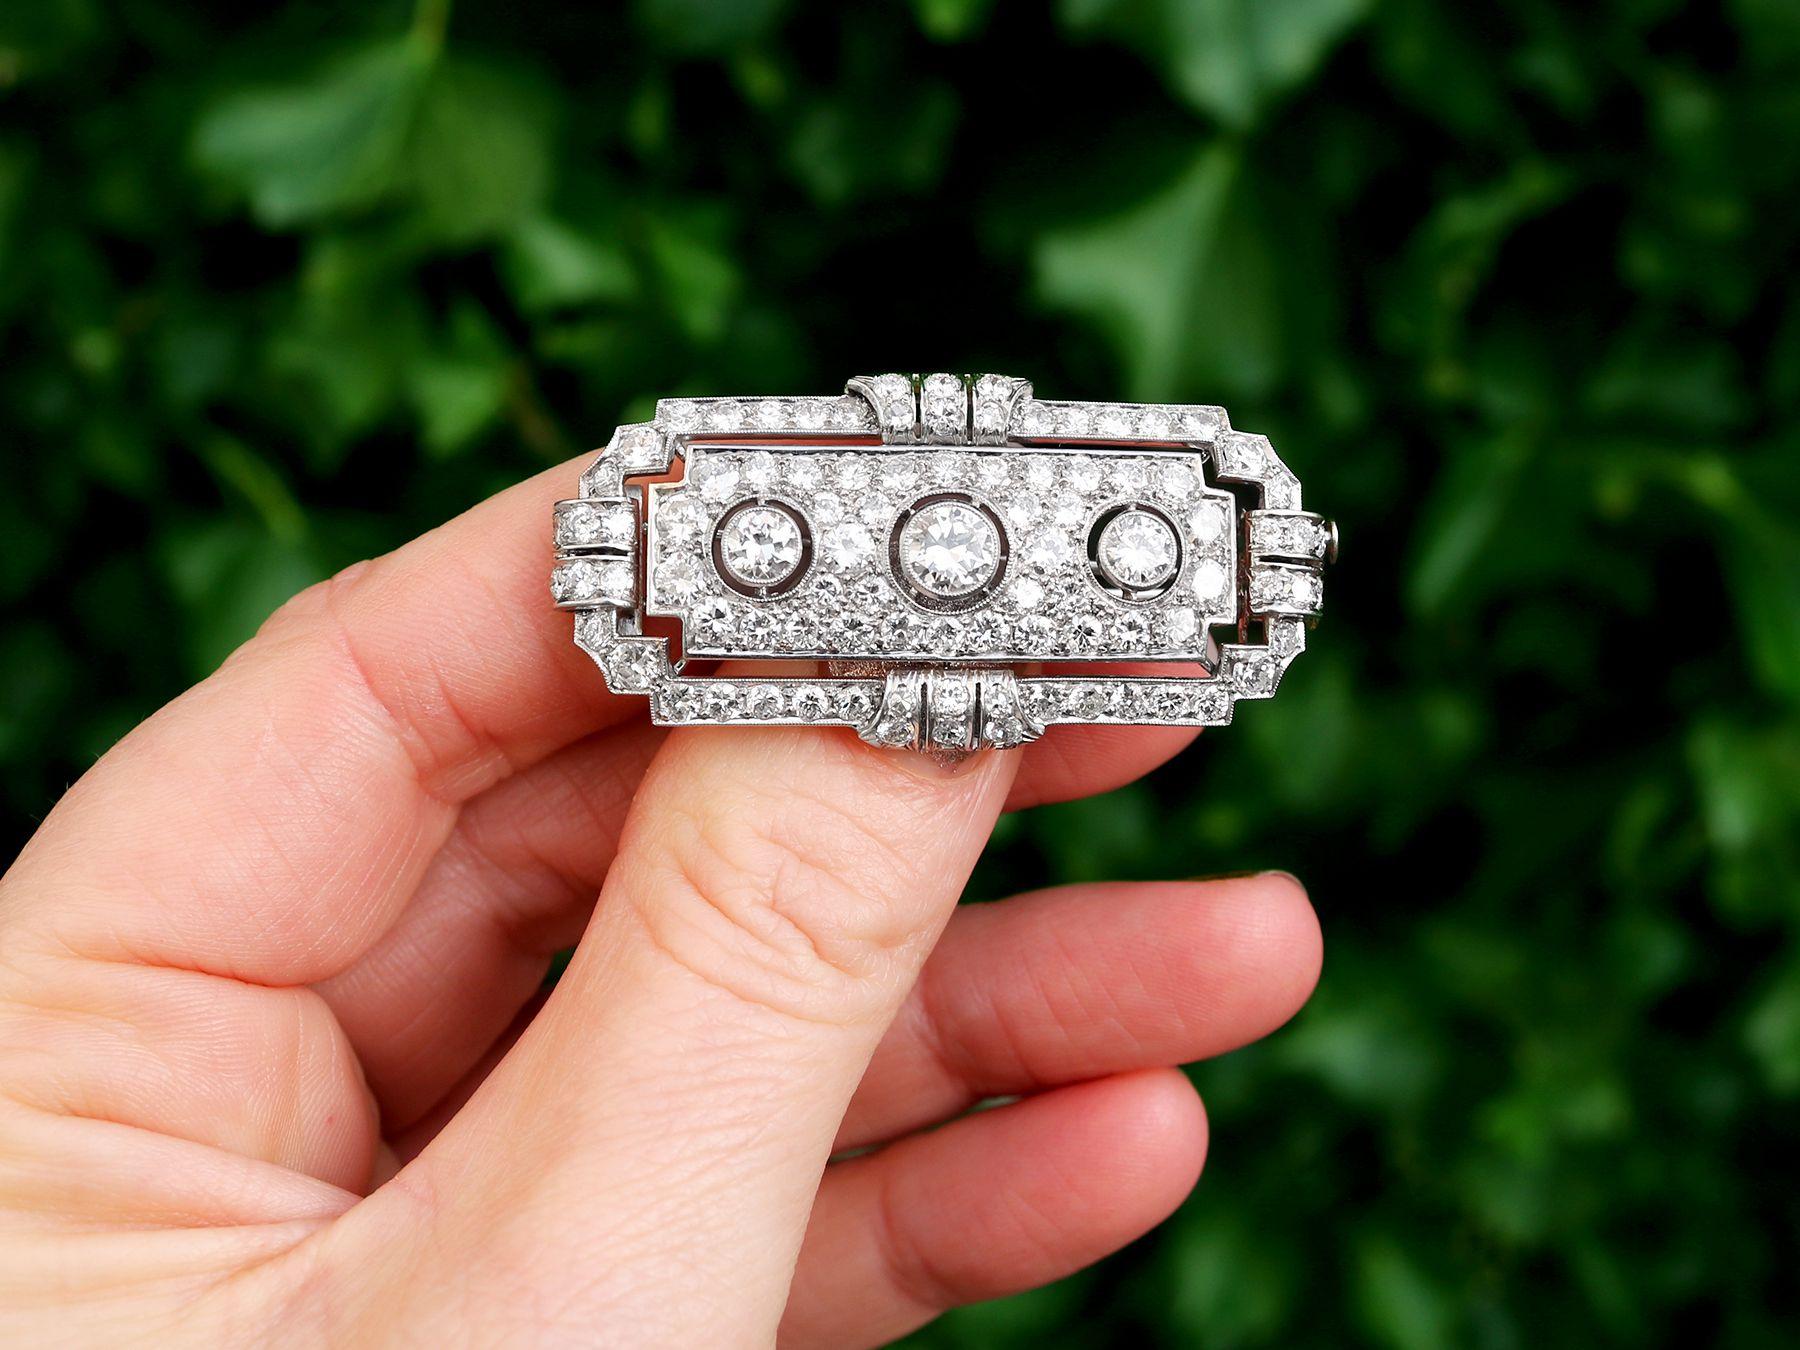 A stunning antique 1930s 6.82 carat diamond and platinum brooch; part of our diverse antique jewelry and estate jewelry collections.

This stunning, fine and impressive antique diamond brooch has been crafted in platinum.

The geometric Art Deco